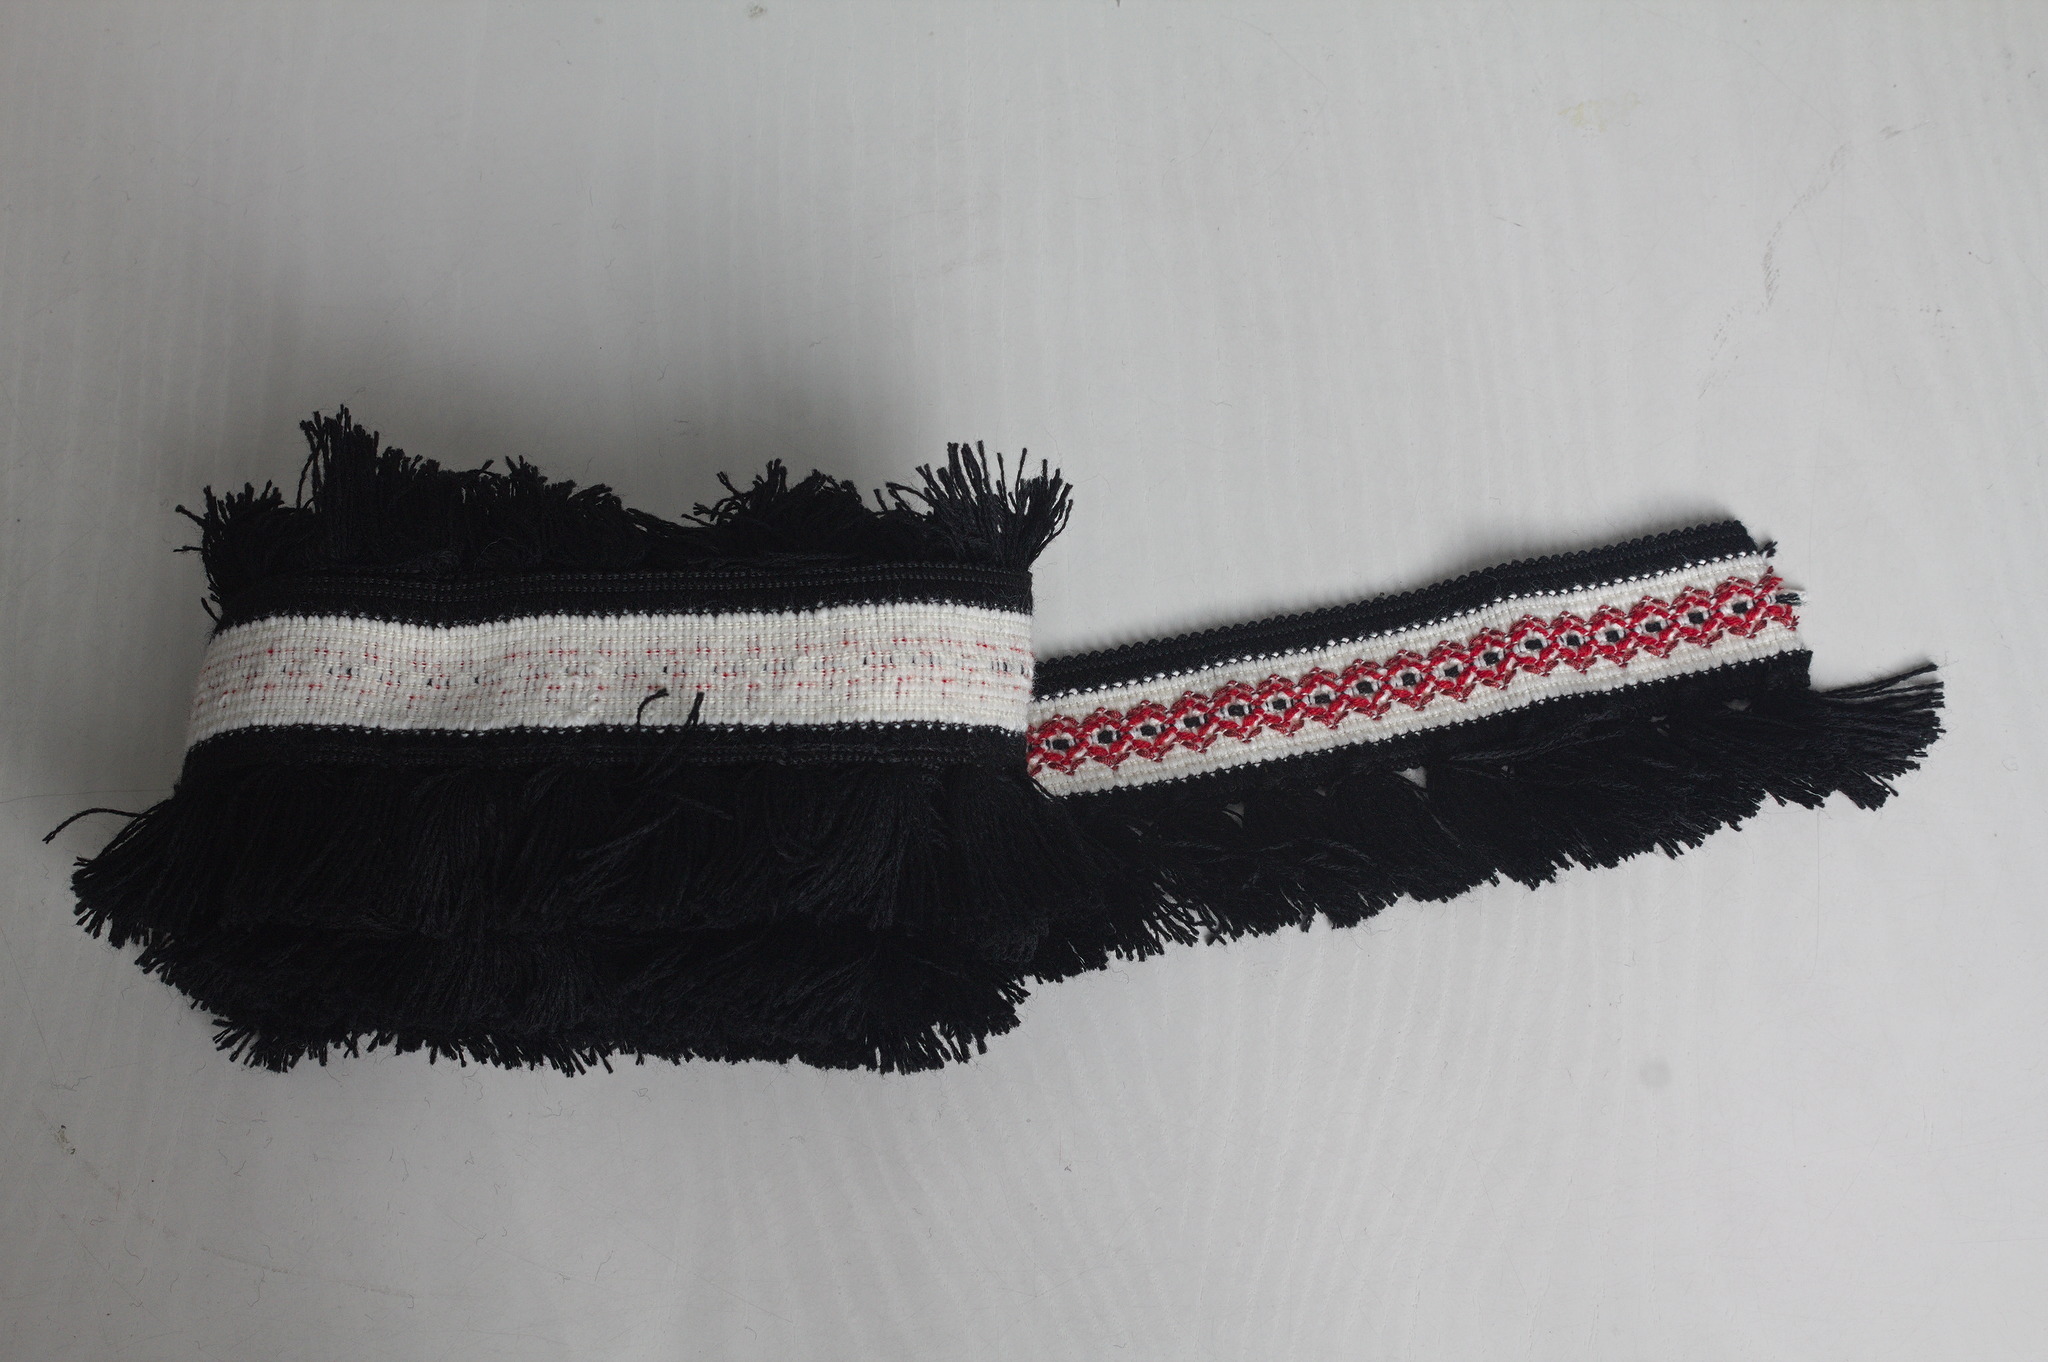 A few meters of wool-imitation fringe trim rolled up; the fringe is black and is attached to a white band with a line of lozenge outlines in red and brown.